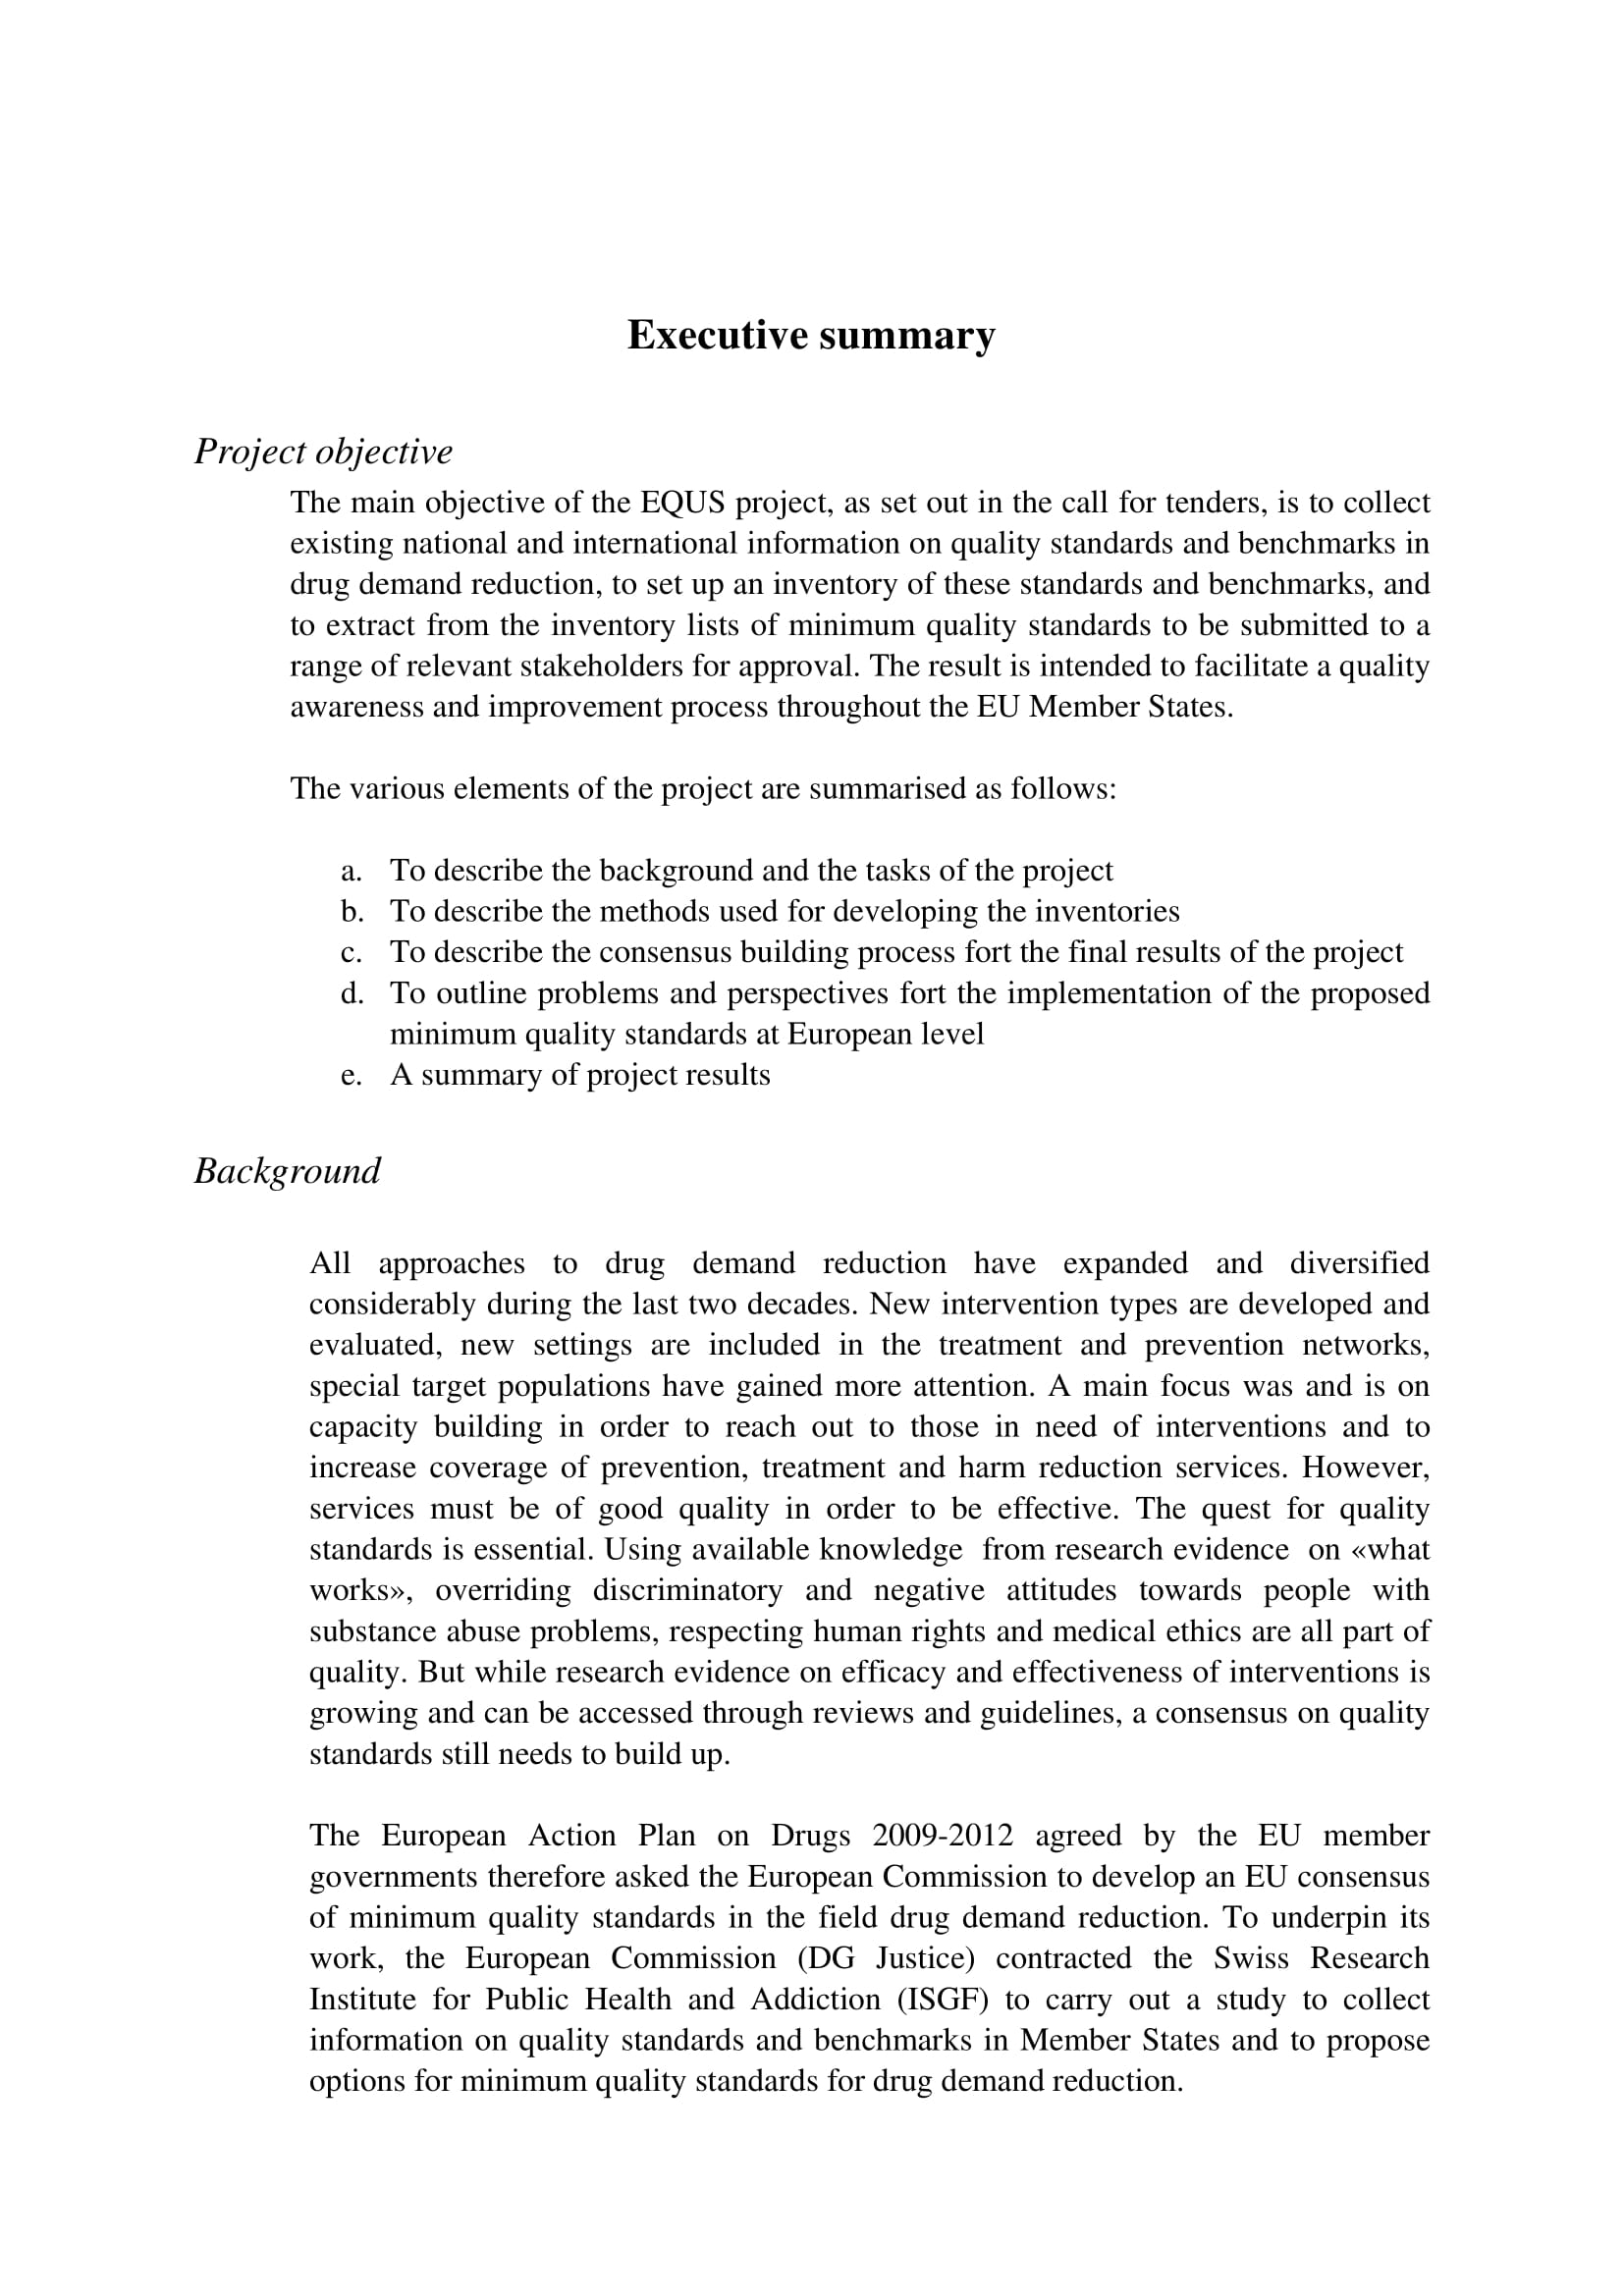 How to critique a qualitative research paper pmp resume it